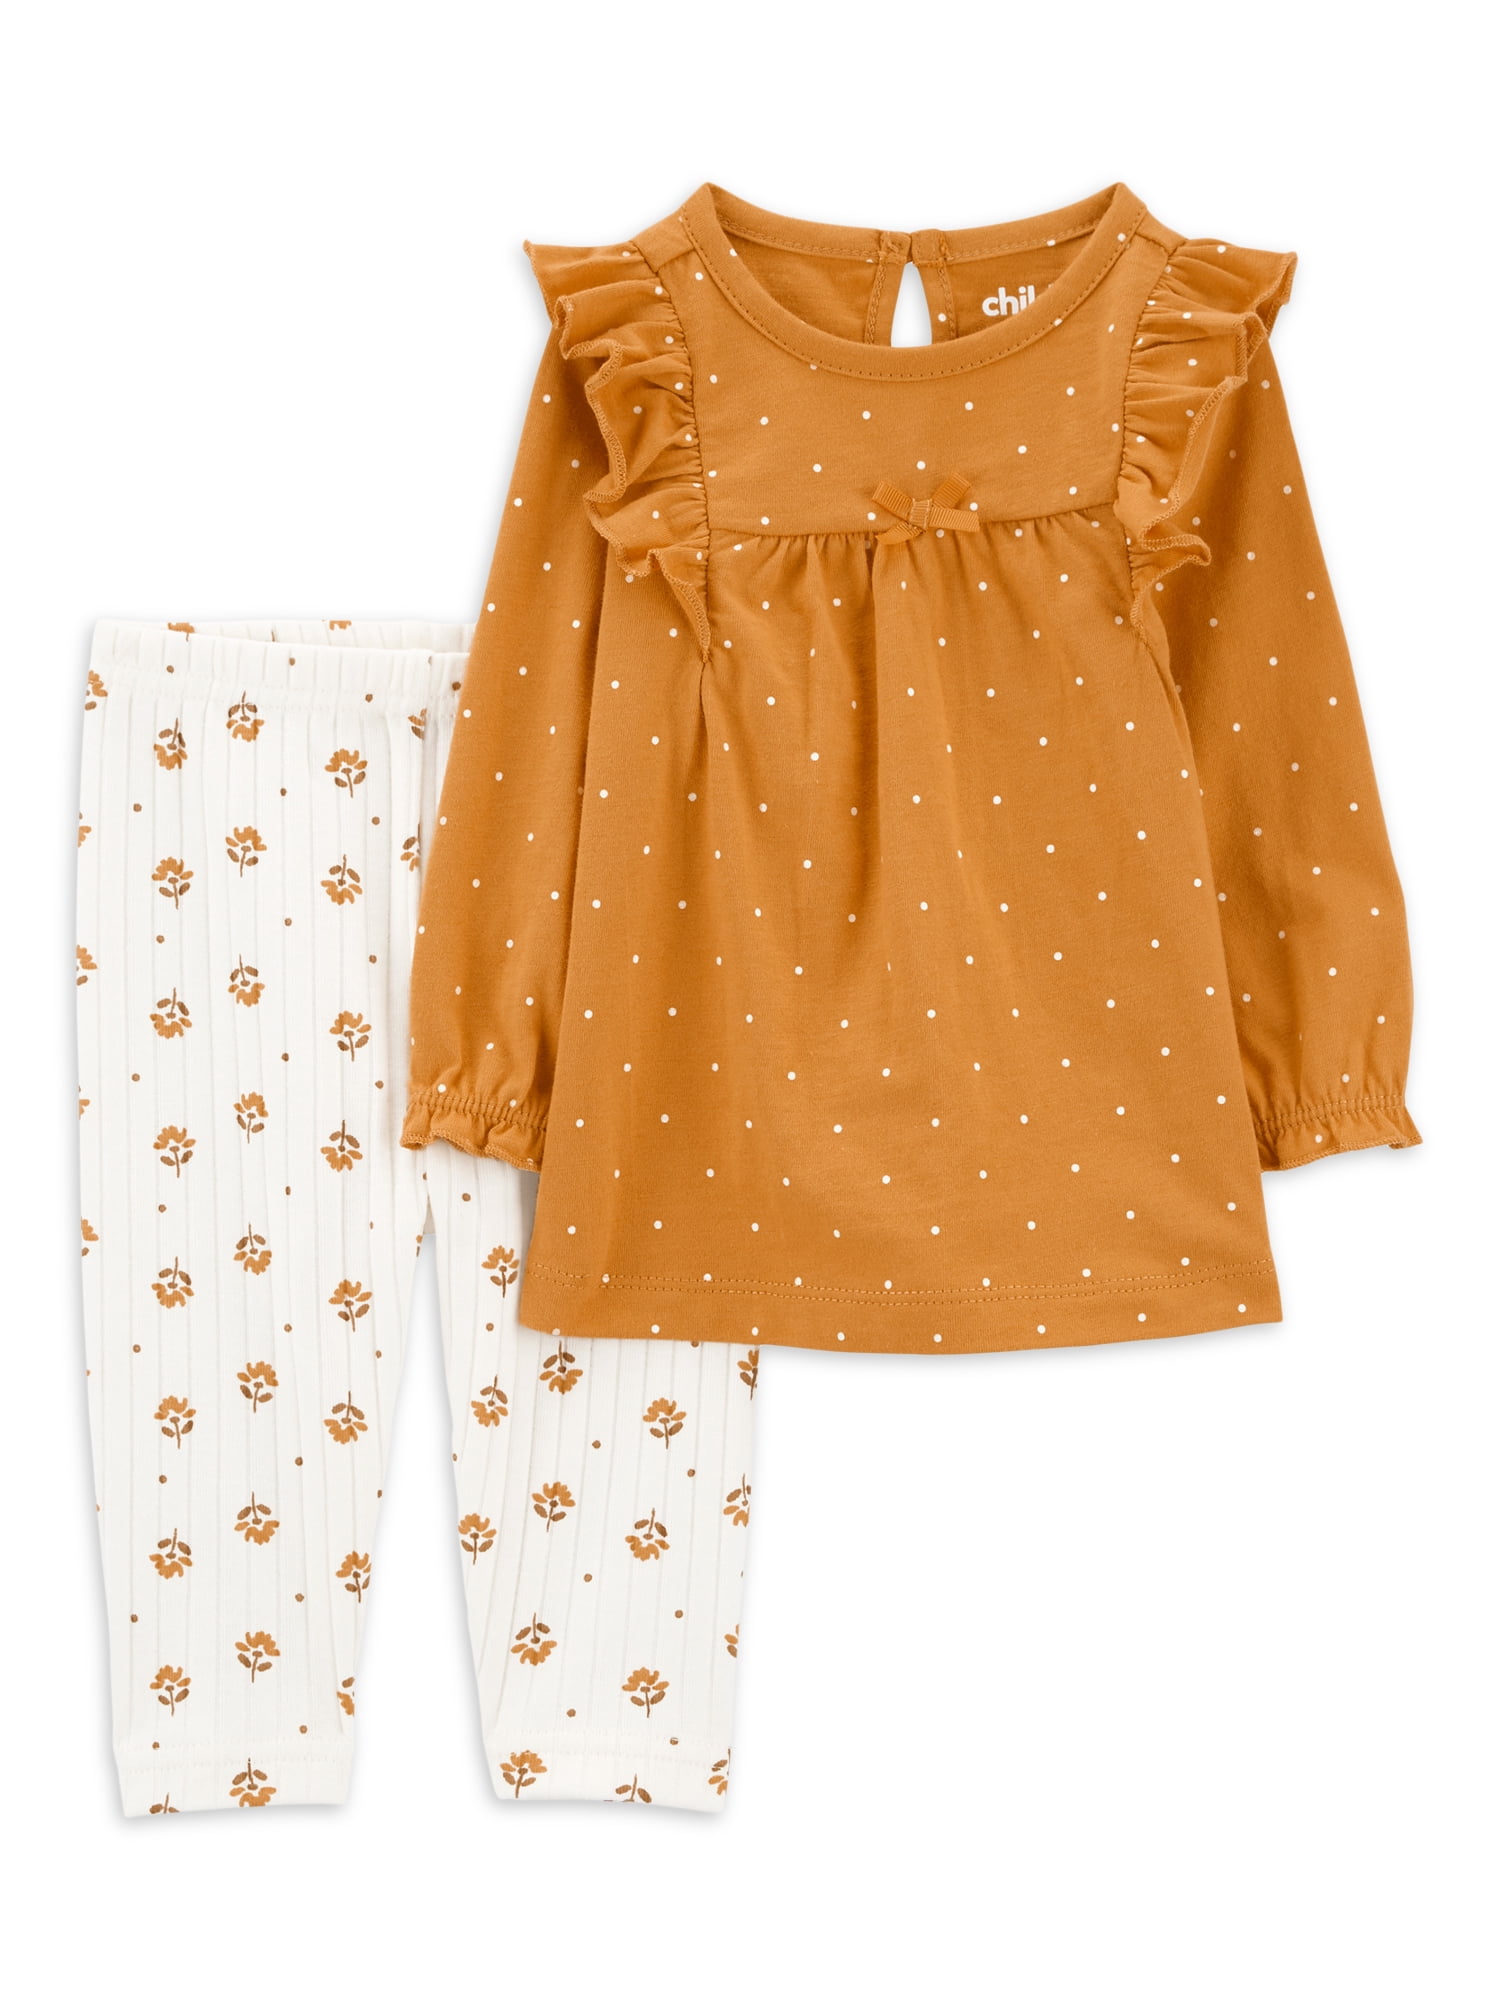 Carter's Child of Mine Baby Girl Outfit Set, 2-Piece, Sizes 0-24M